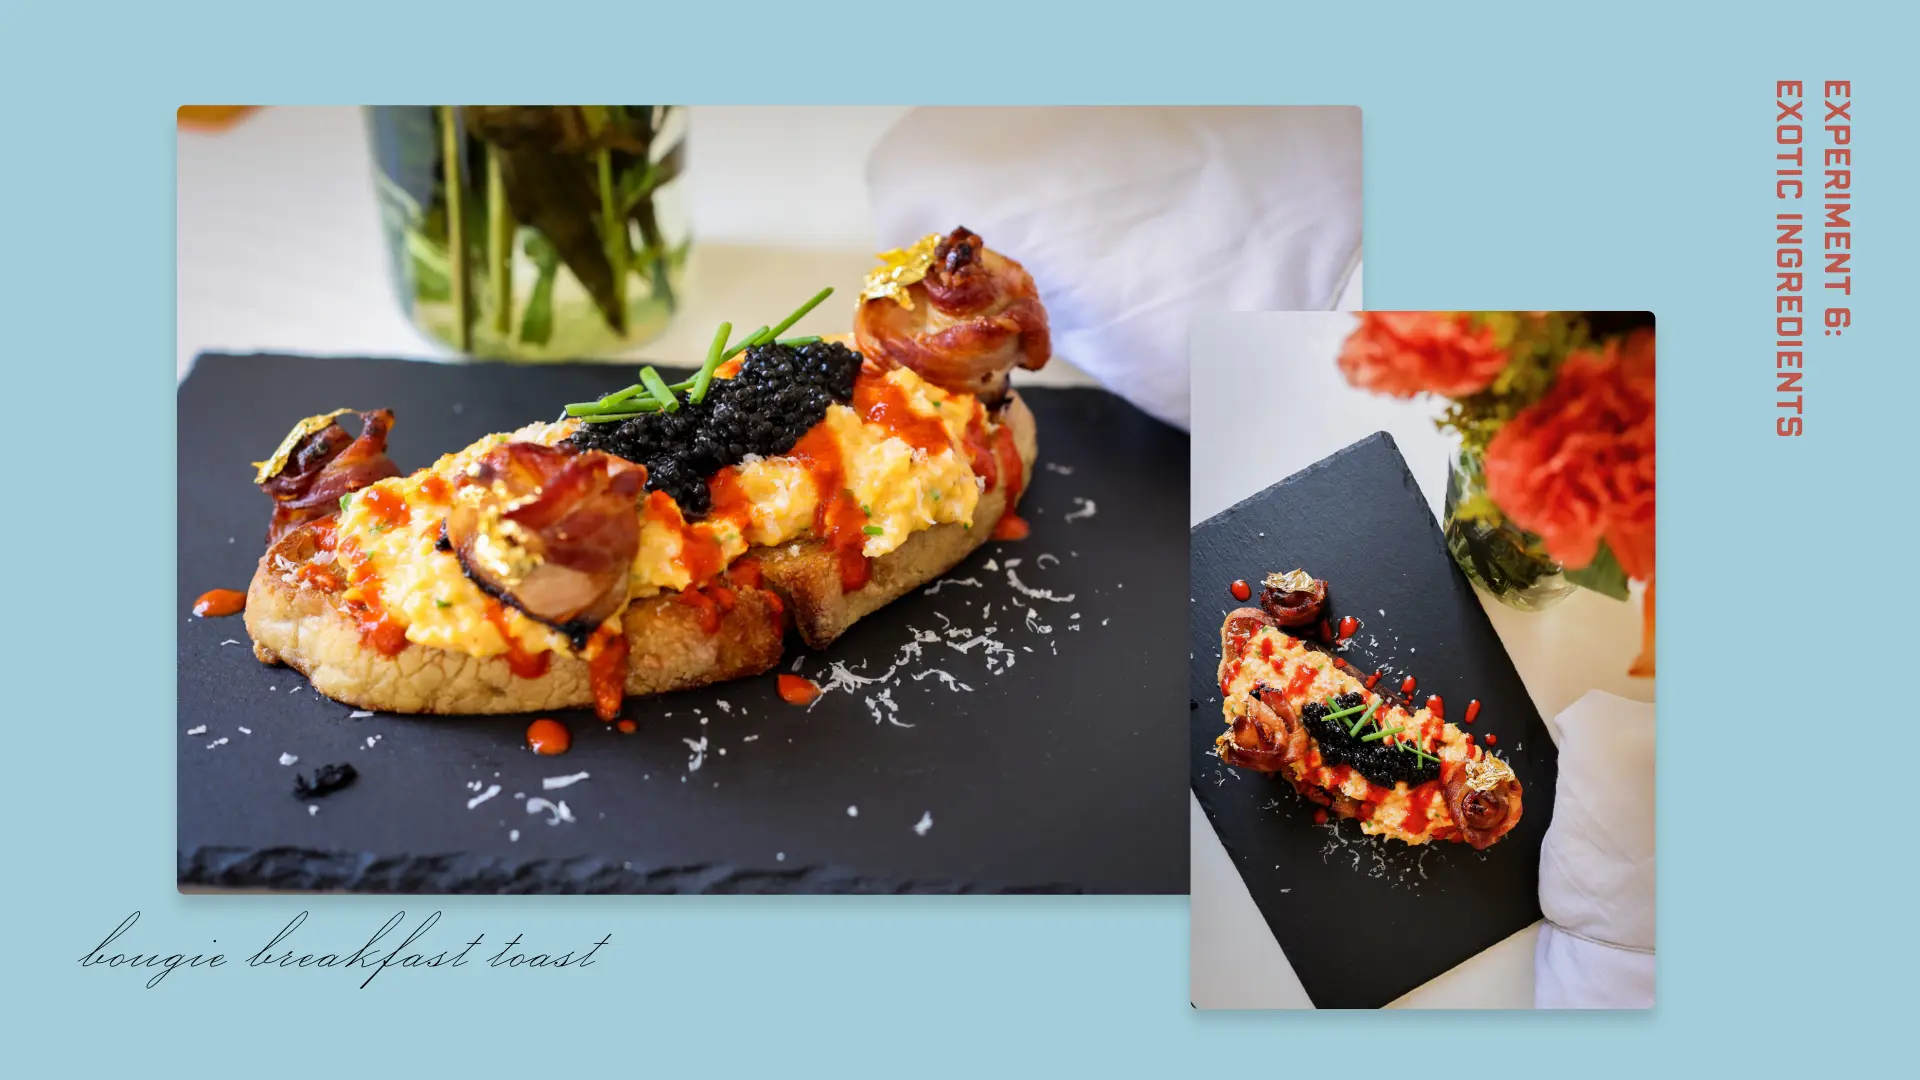 Two photographs of  plates of food on a light blue background. On the left, a side view of slice of sourdough toast topped with eggs, bacon rosettes, hot sauce and caviar on a black platter and on the right a top view of the same breakfast toast.